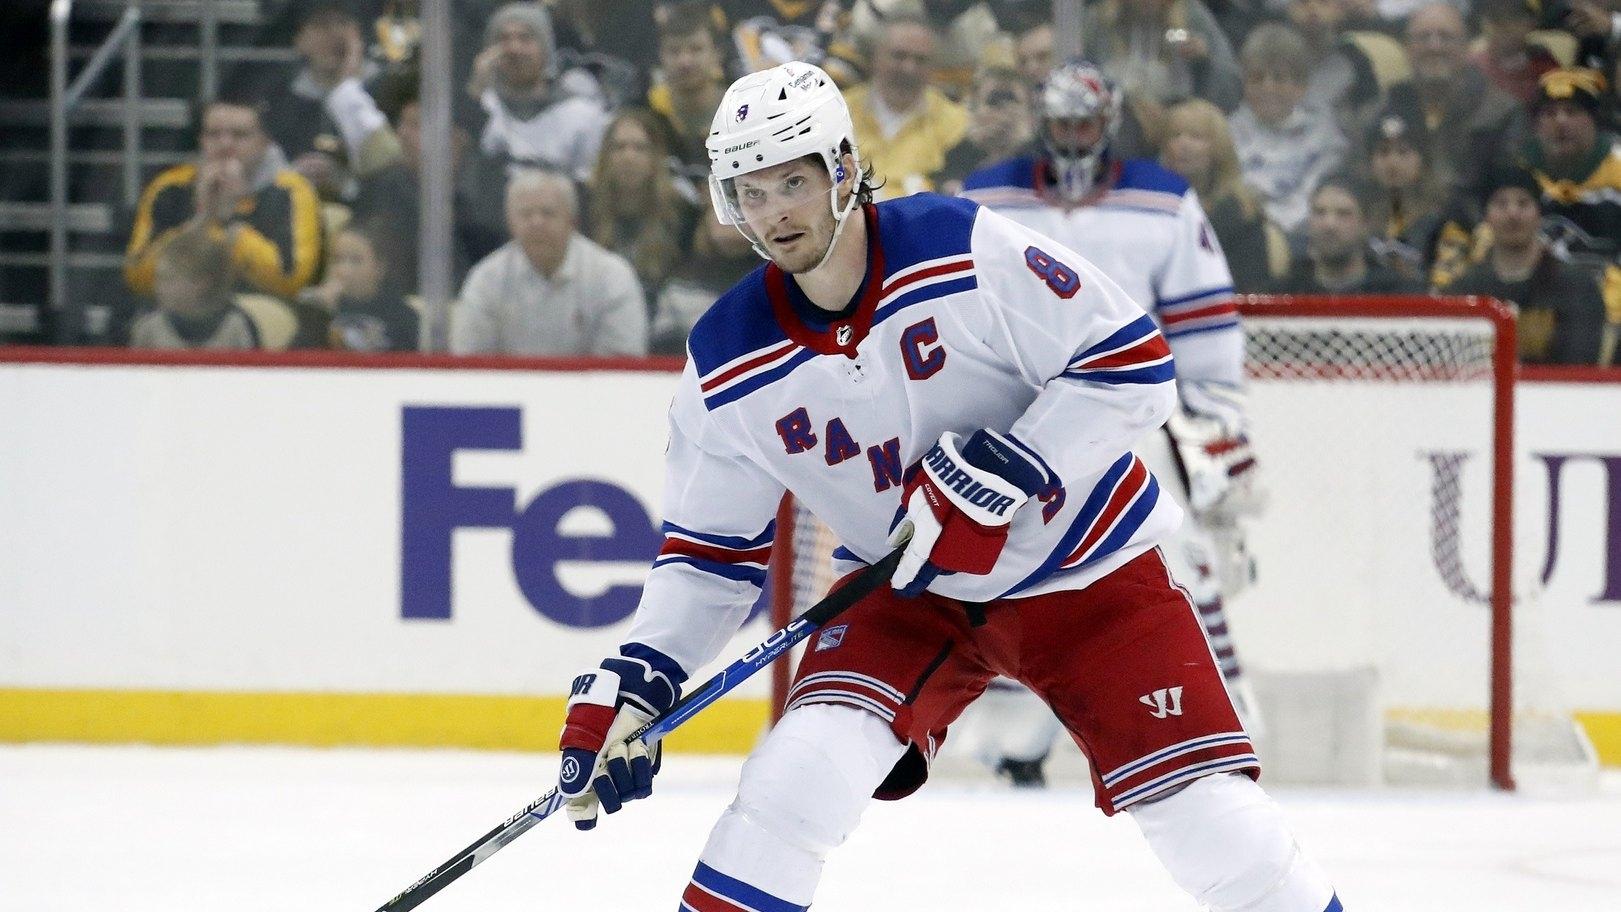 New York Rangers defenseman Jacob Trouba (8) skates up ice with the puck against the Pittsburgh Penguins.